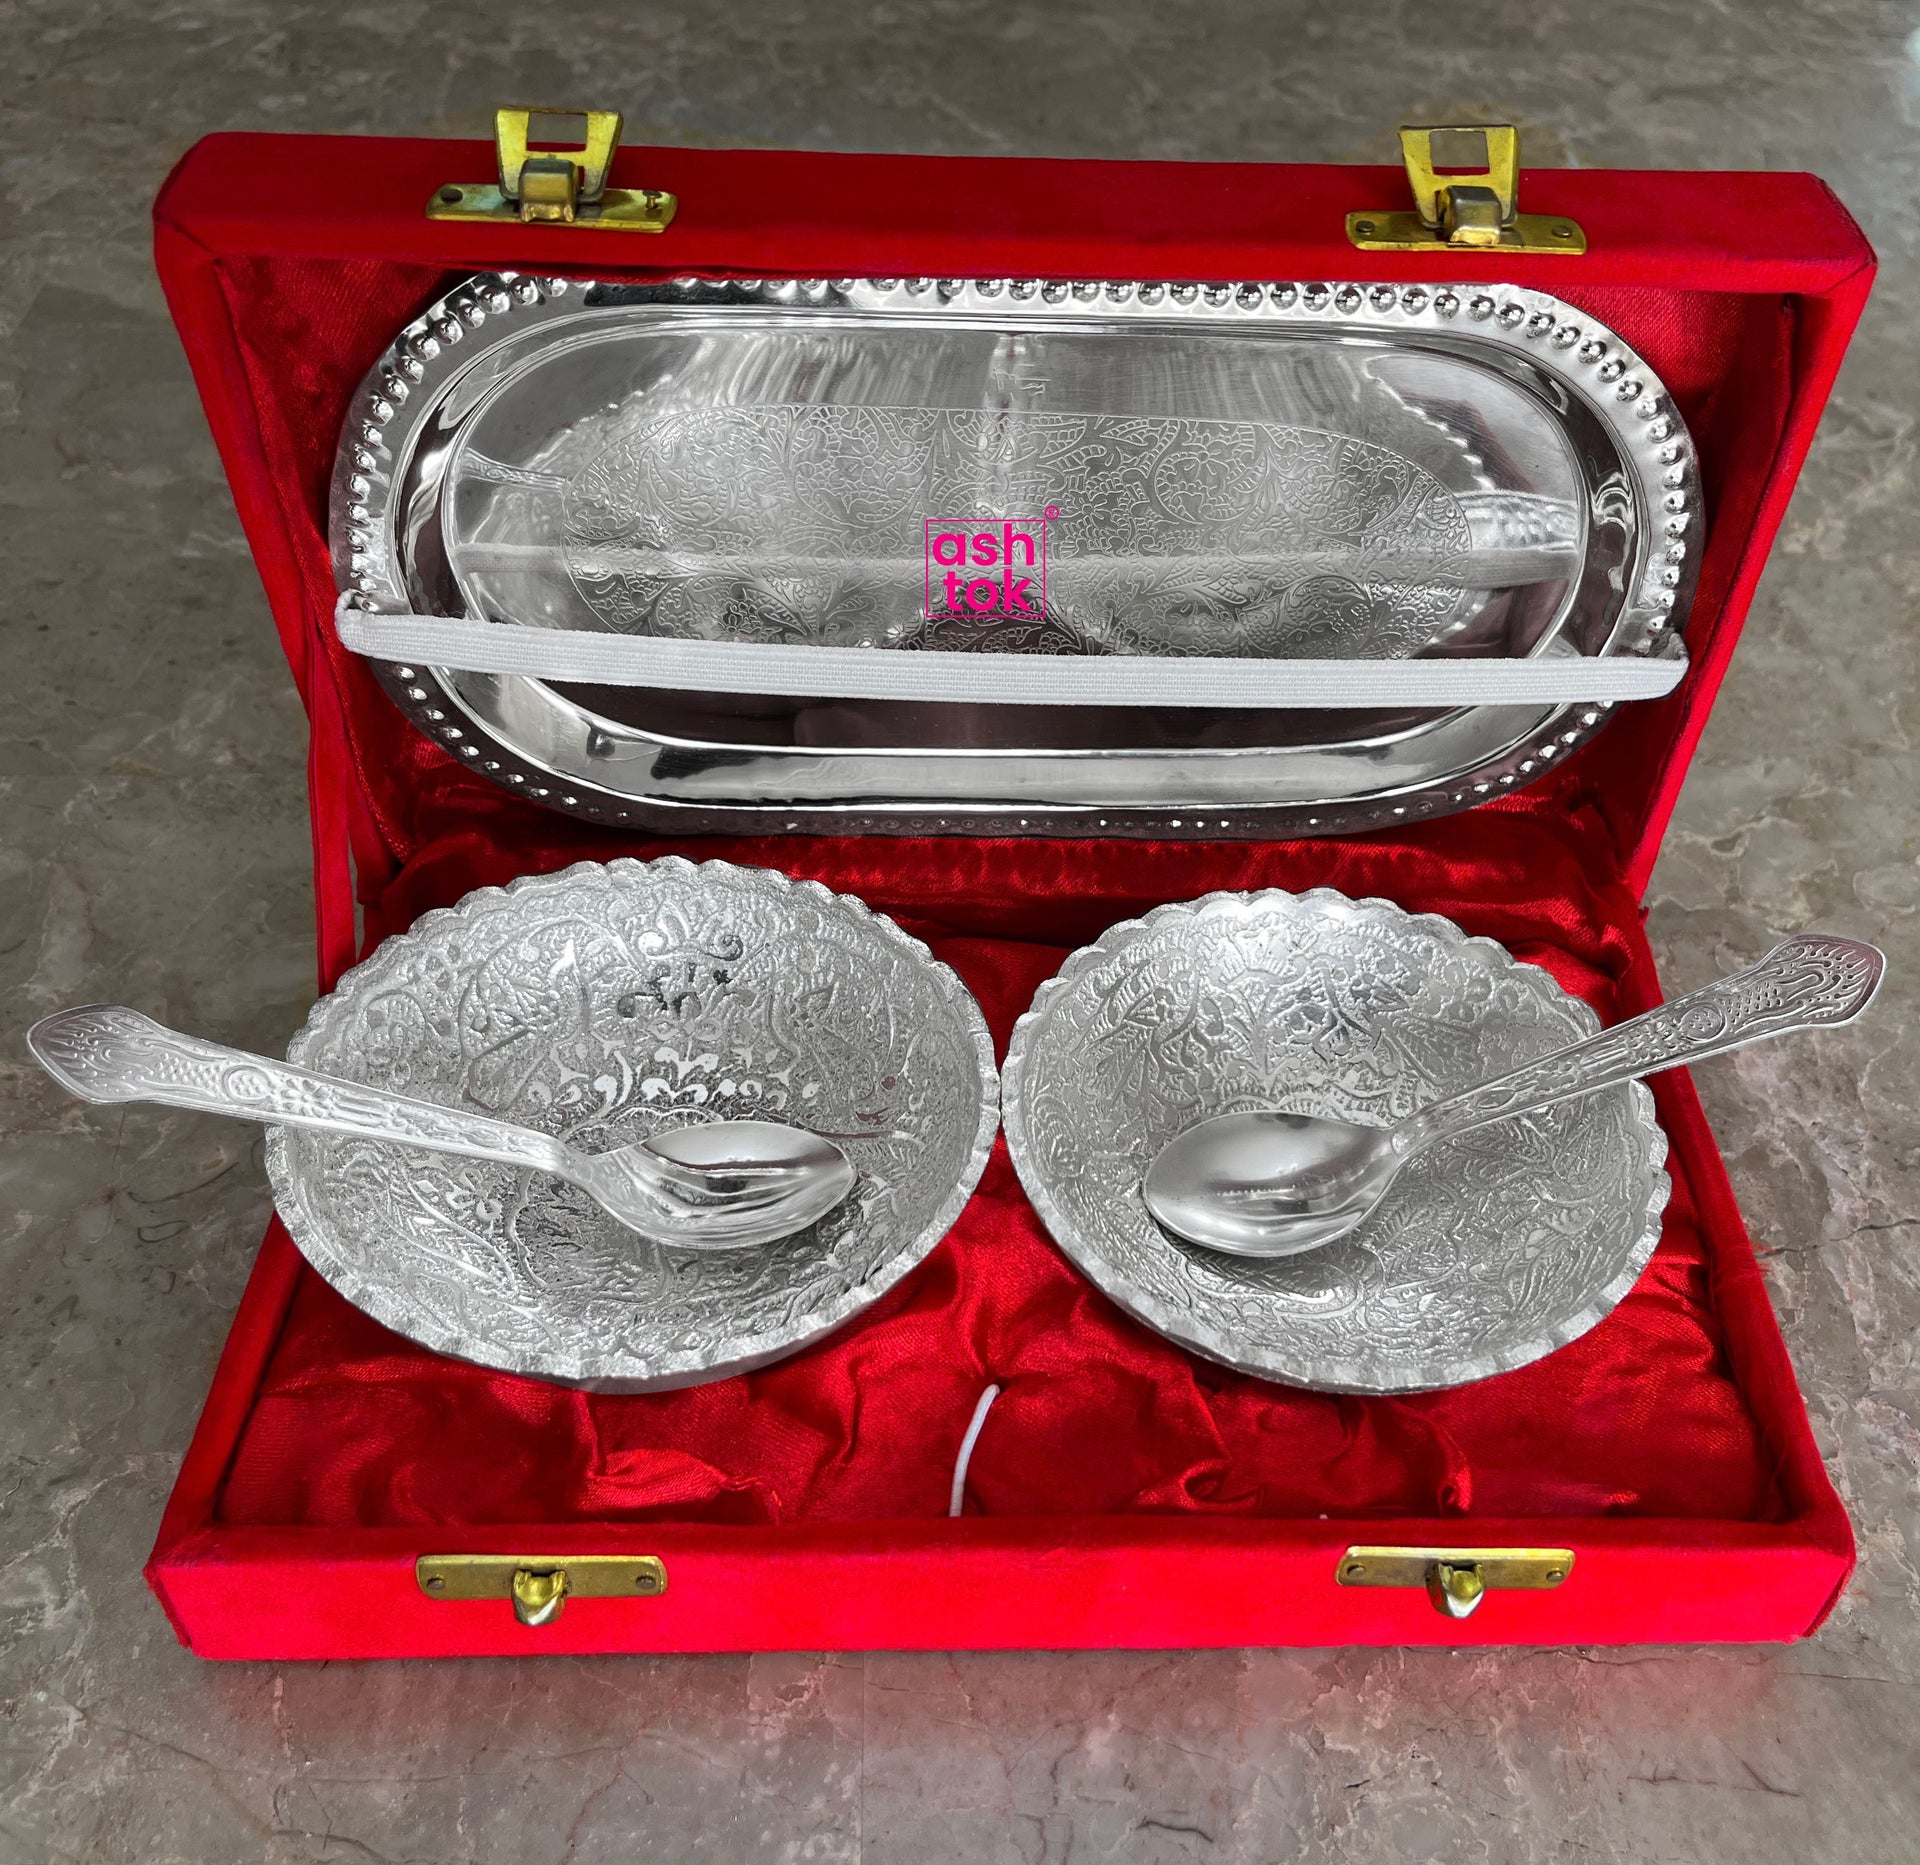 Silver & Gold Plated Bowl (set of 4) with Plate - WL2799 - WL2799-1 at Rs  678.30 | Gifts for all occasions by Wedtree